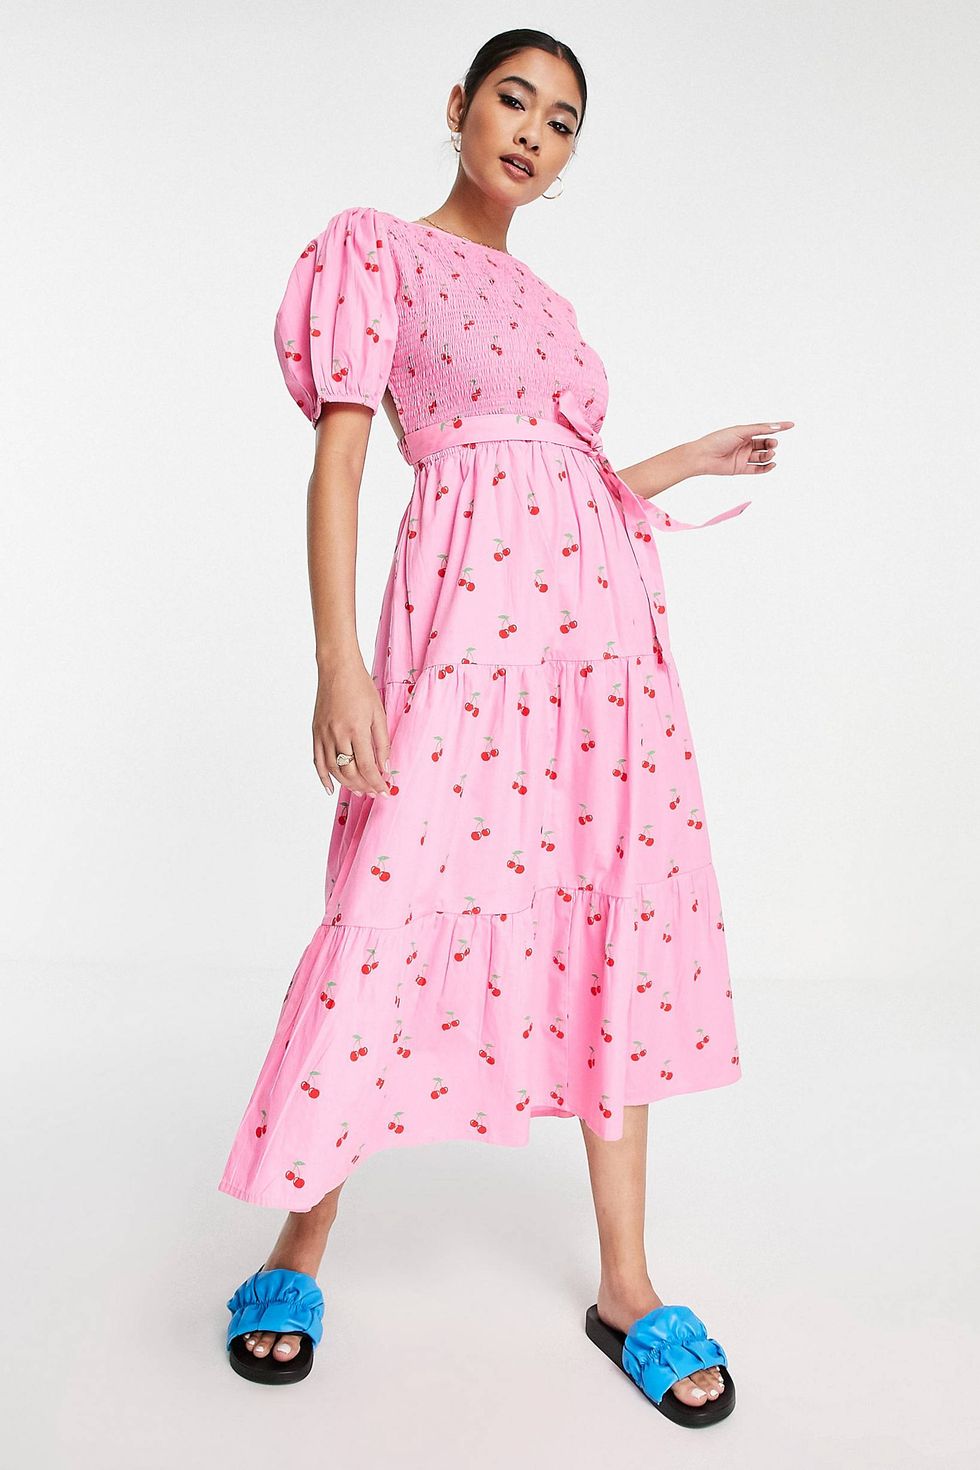 Shirred top tiered midi tea dress with tie back in pink cherry print - ASOS summer dresses